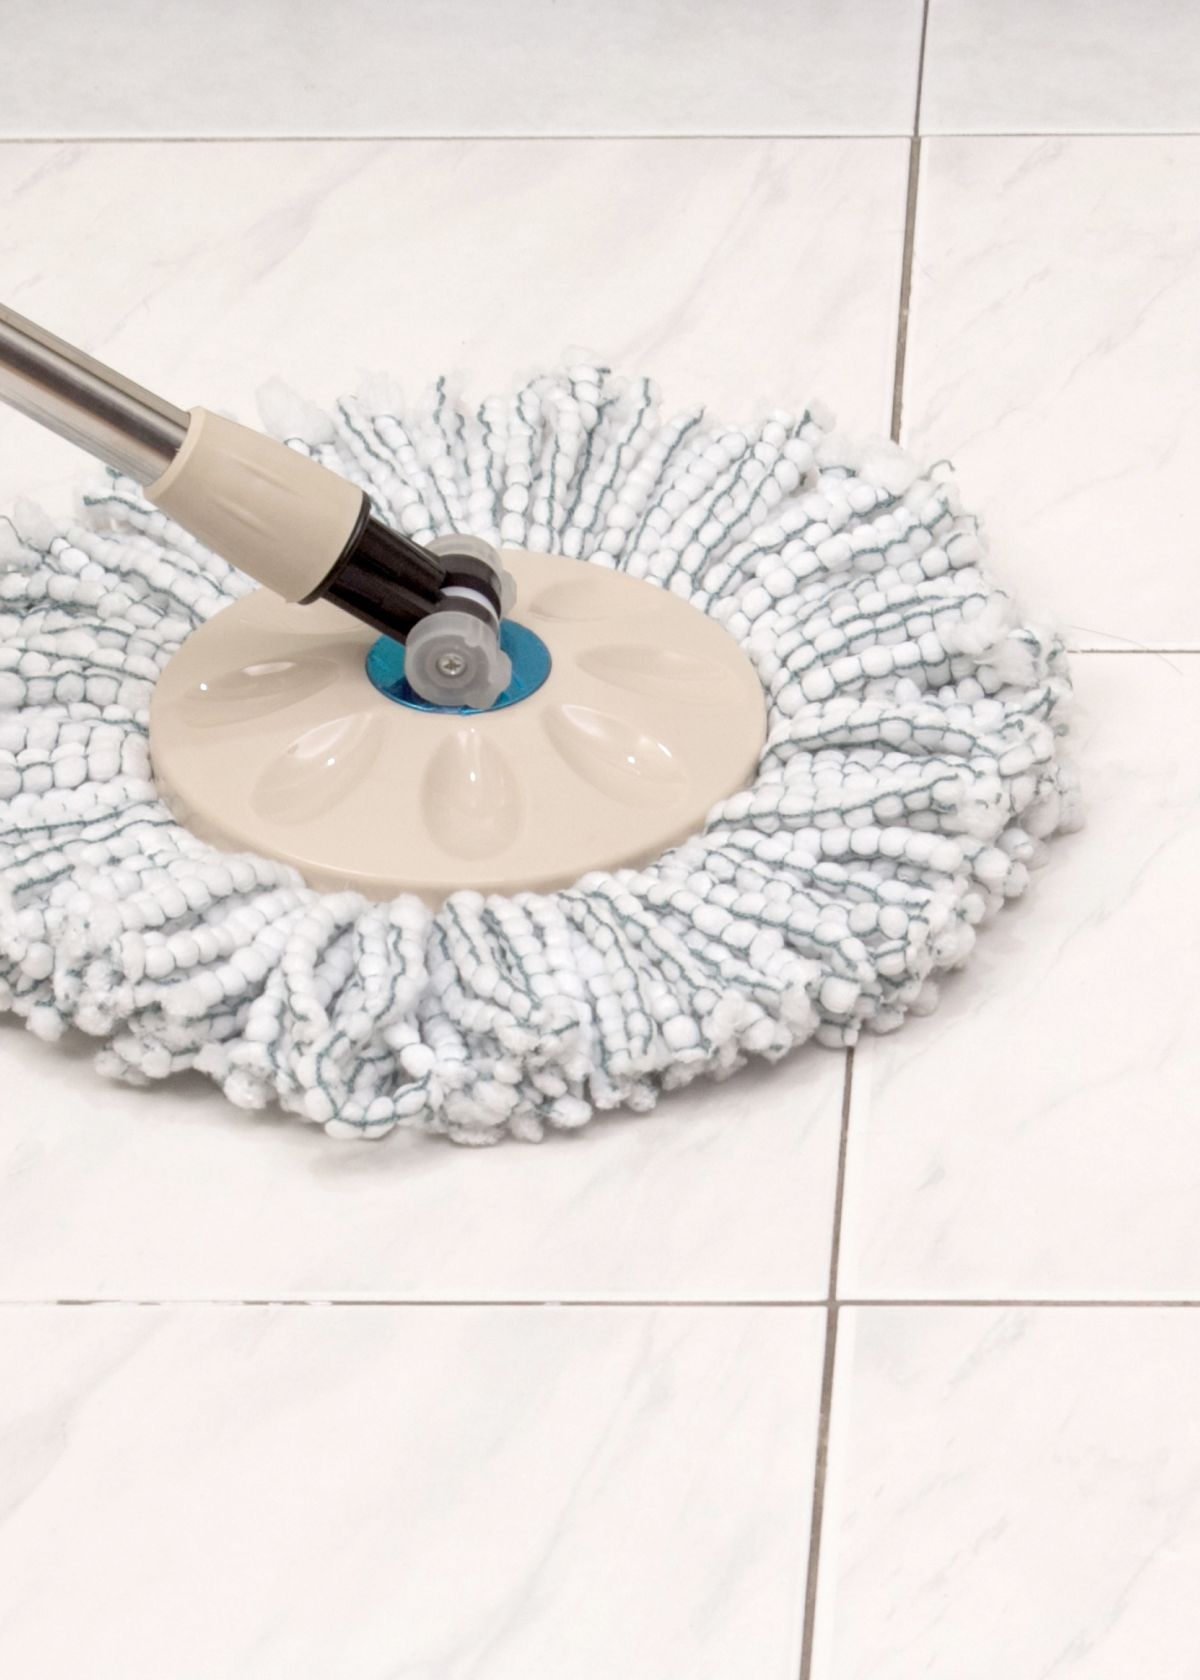 How to Clean Sticky Tile Floor